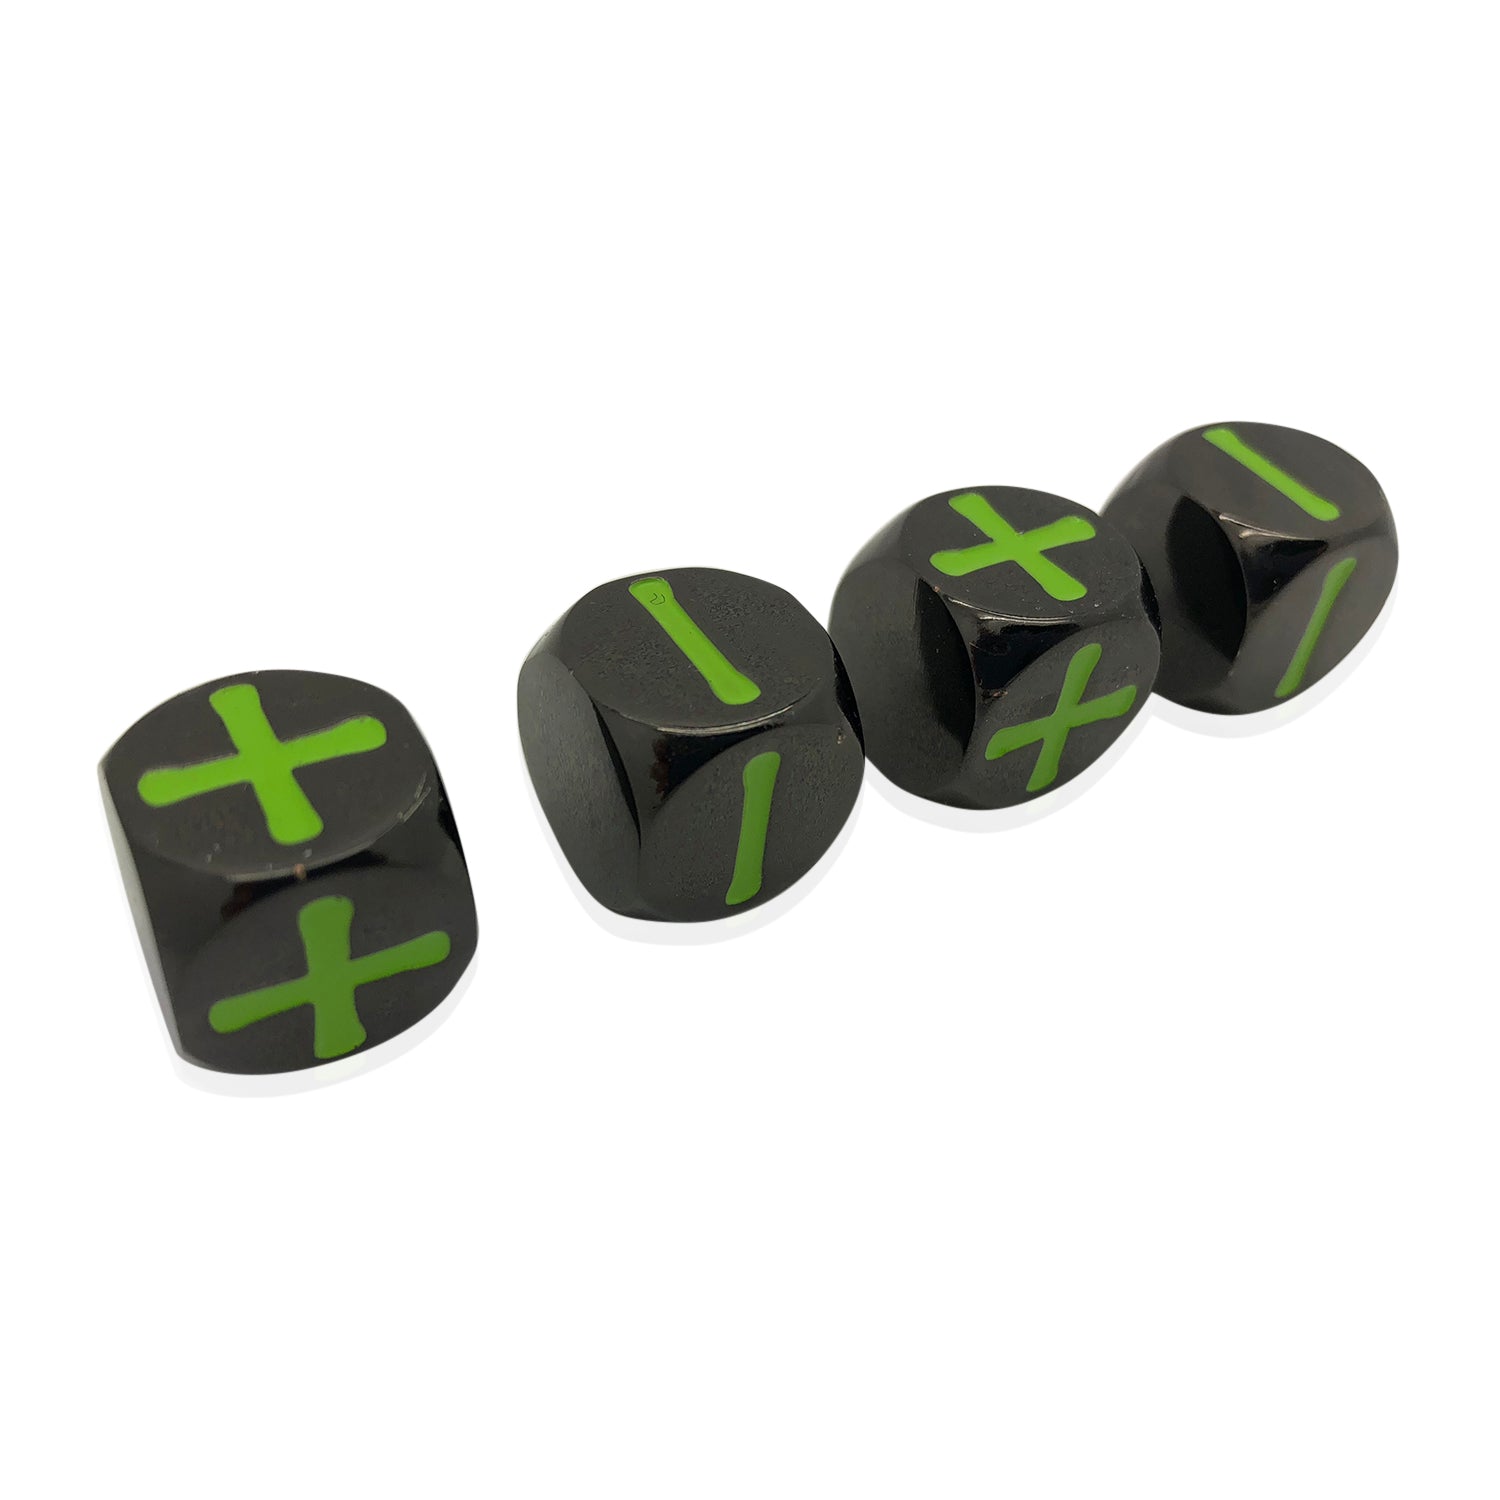 Fate Dice – Poisoned Daggers Pack of 4 Metal Dice